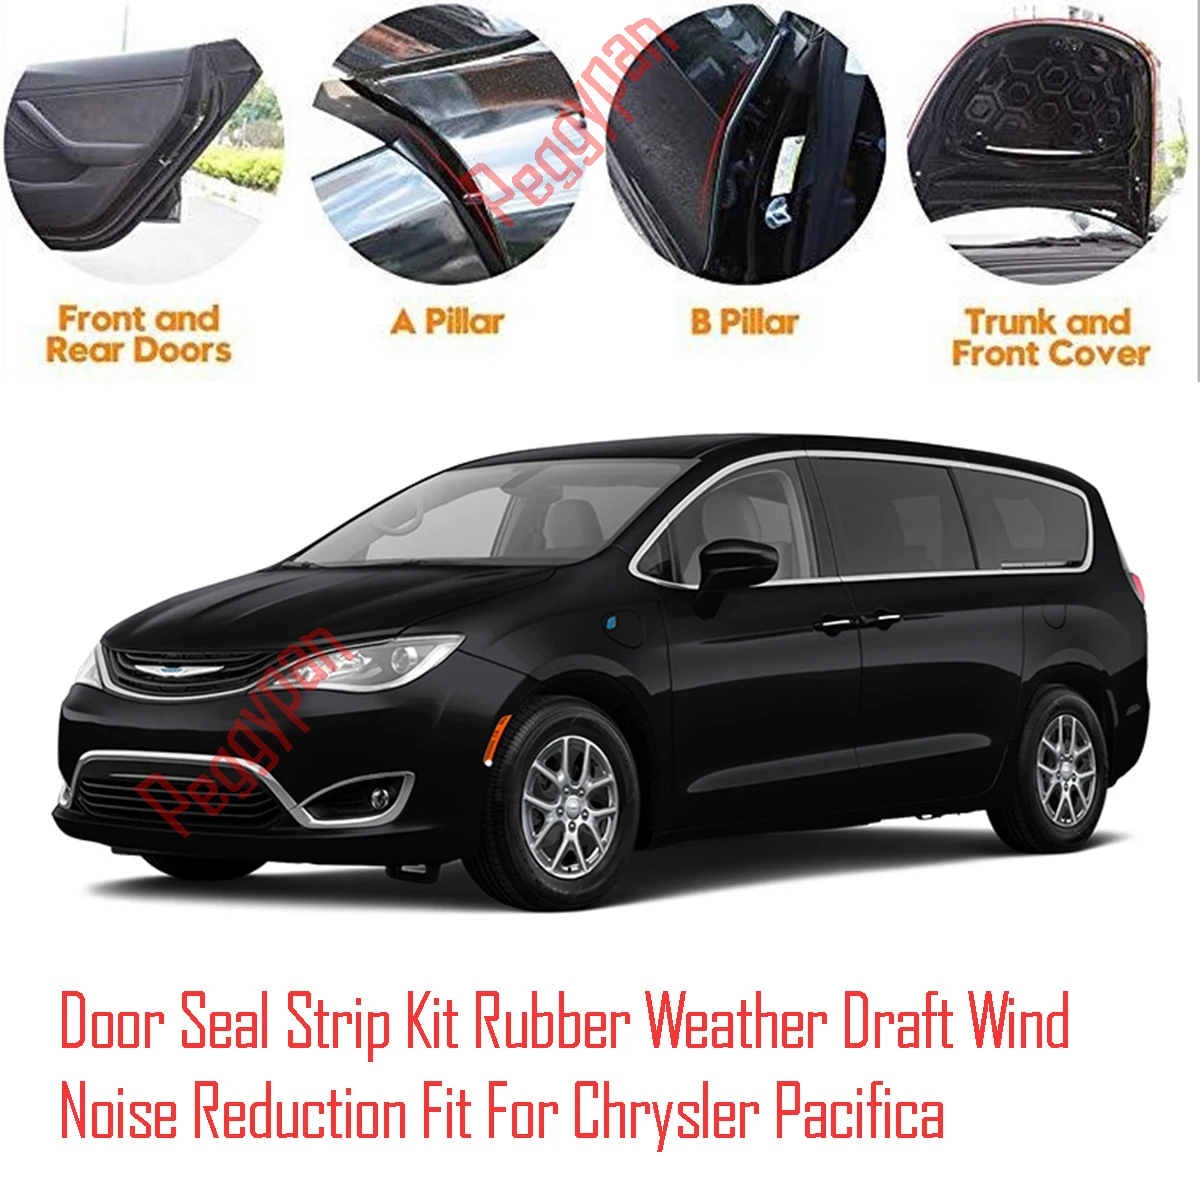 Door Seal Strip Kit Self Adhesive Window Engine Cover Soundproof Rubber Weather Draft Wind Noise Reduction For Chrysler Pacifica